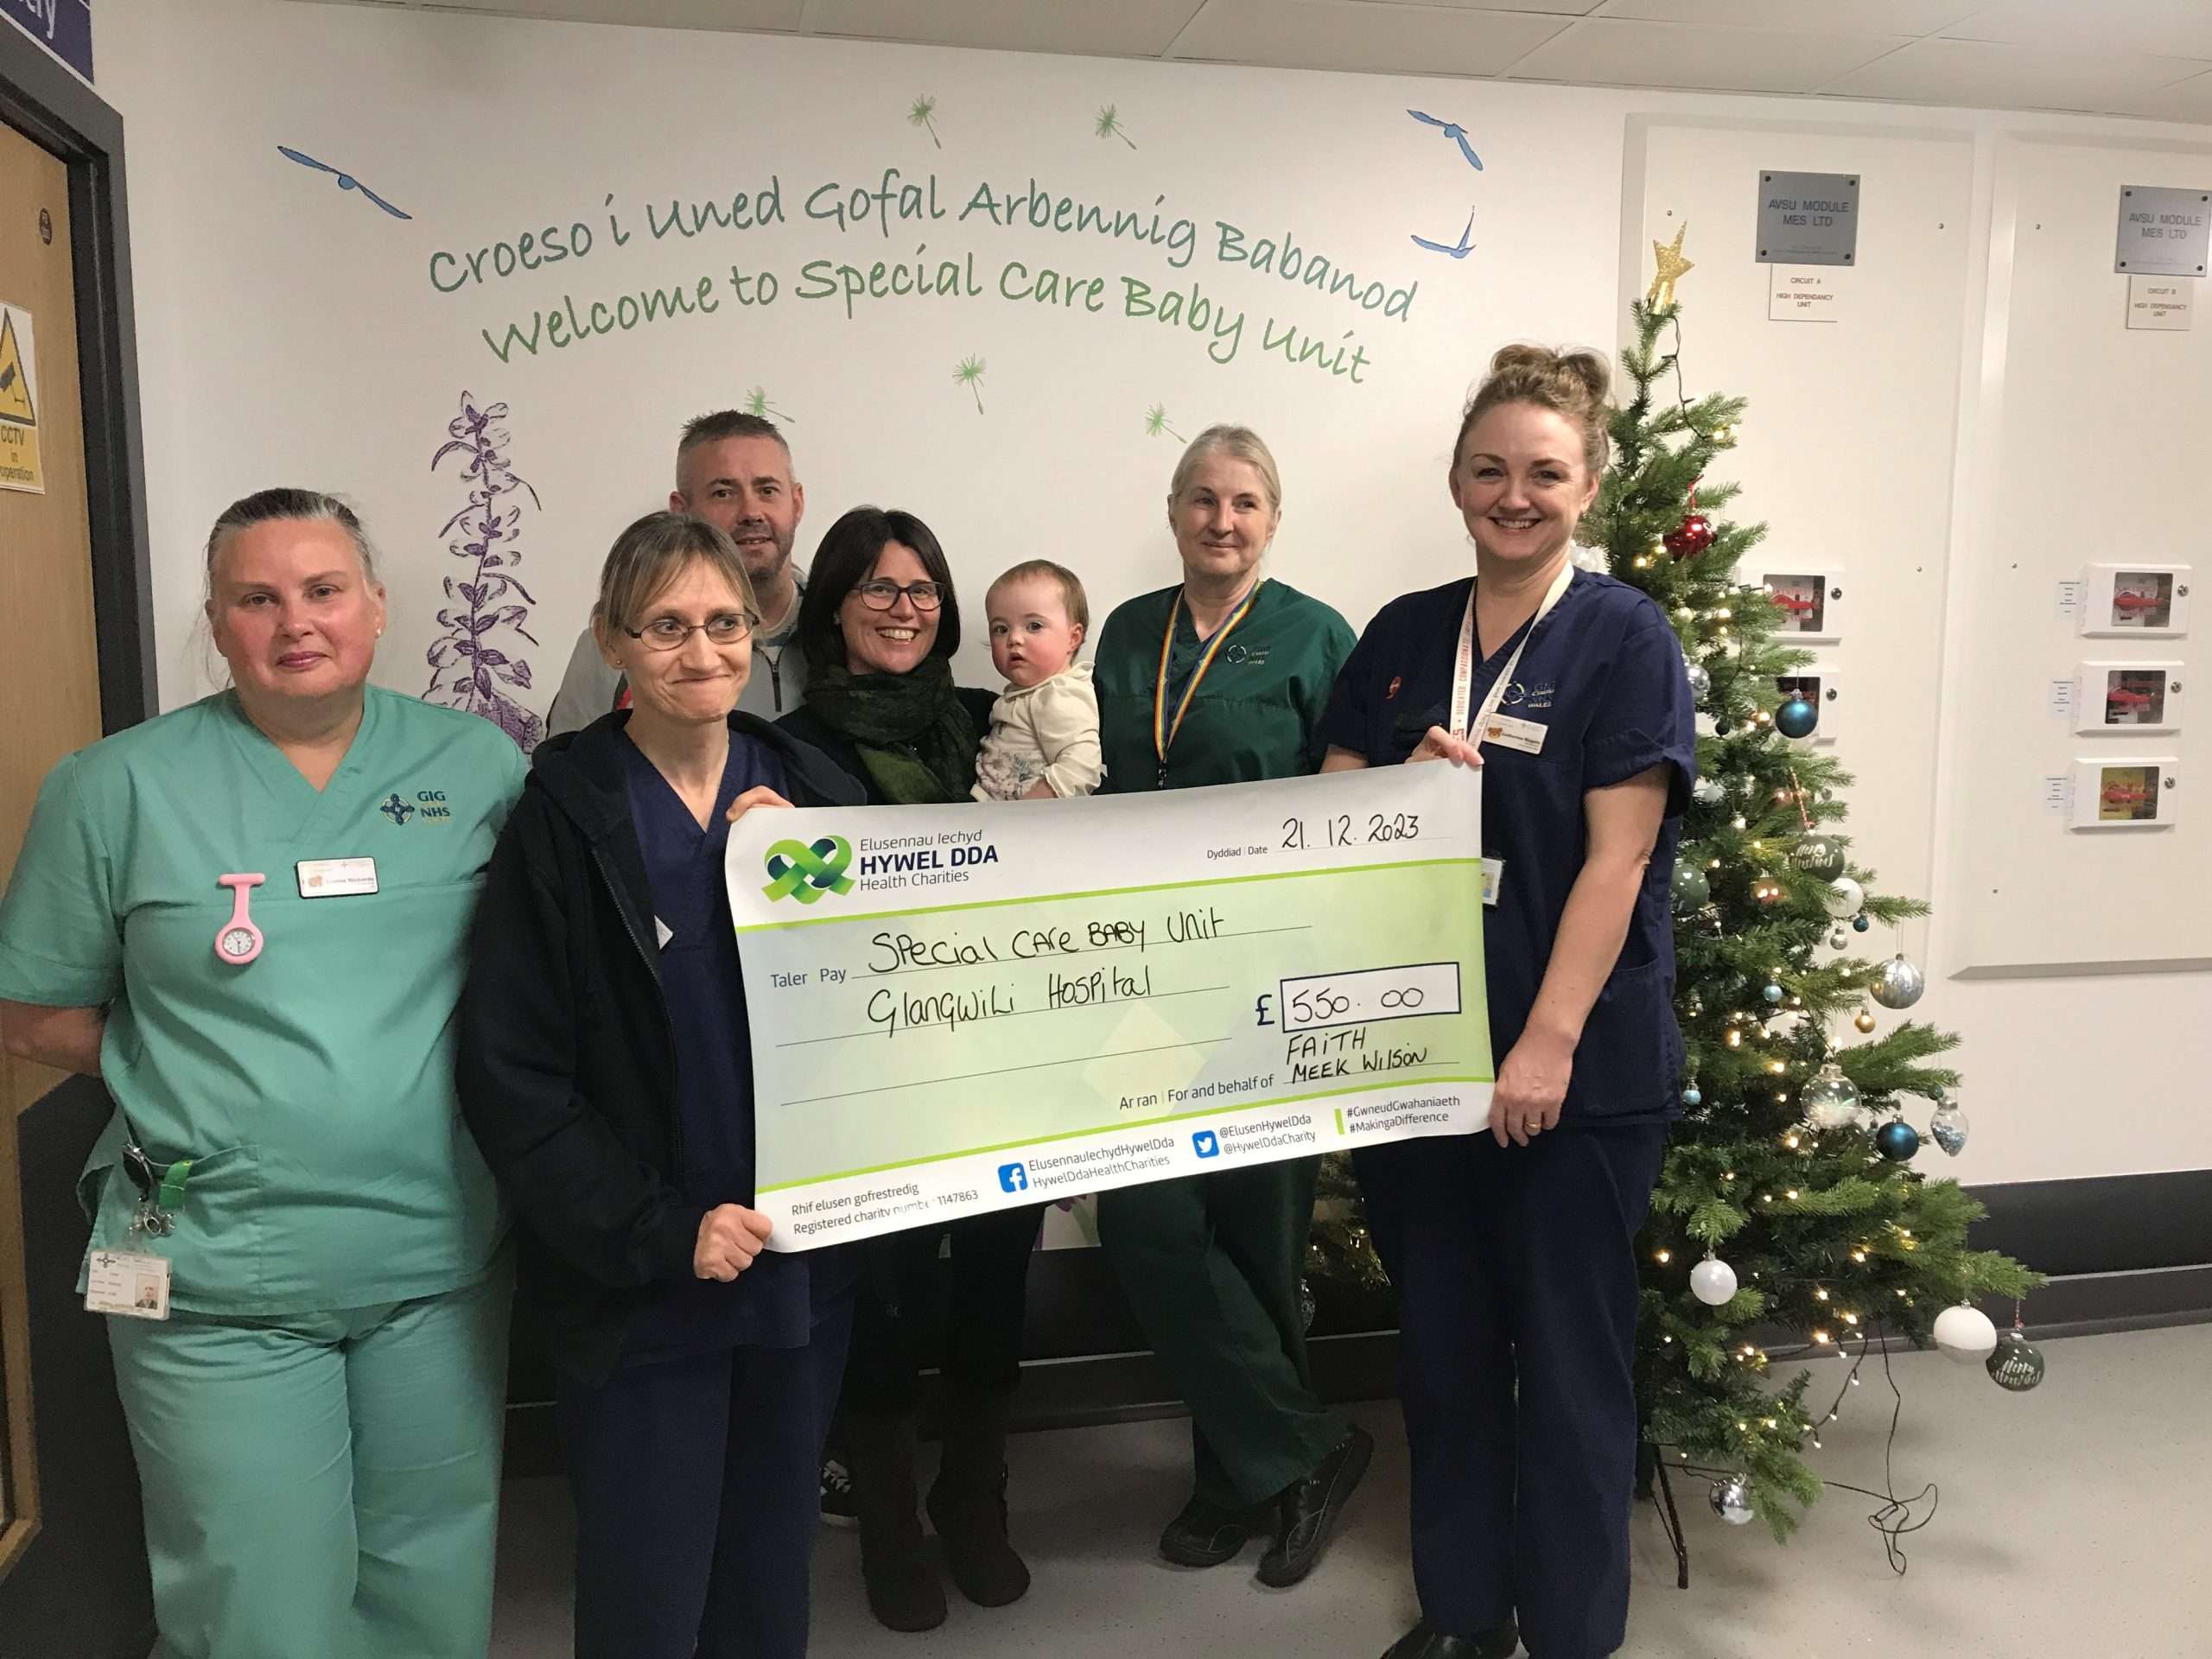 Family raises over £500 for Special Care Baby Unit